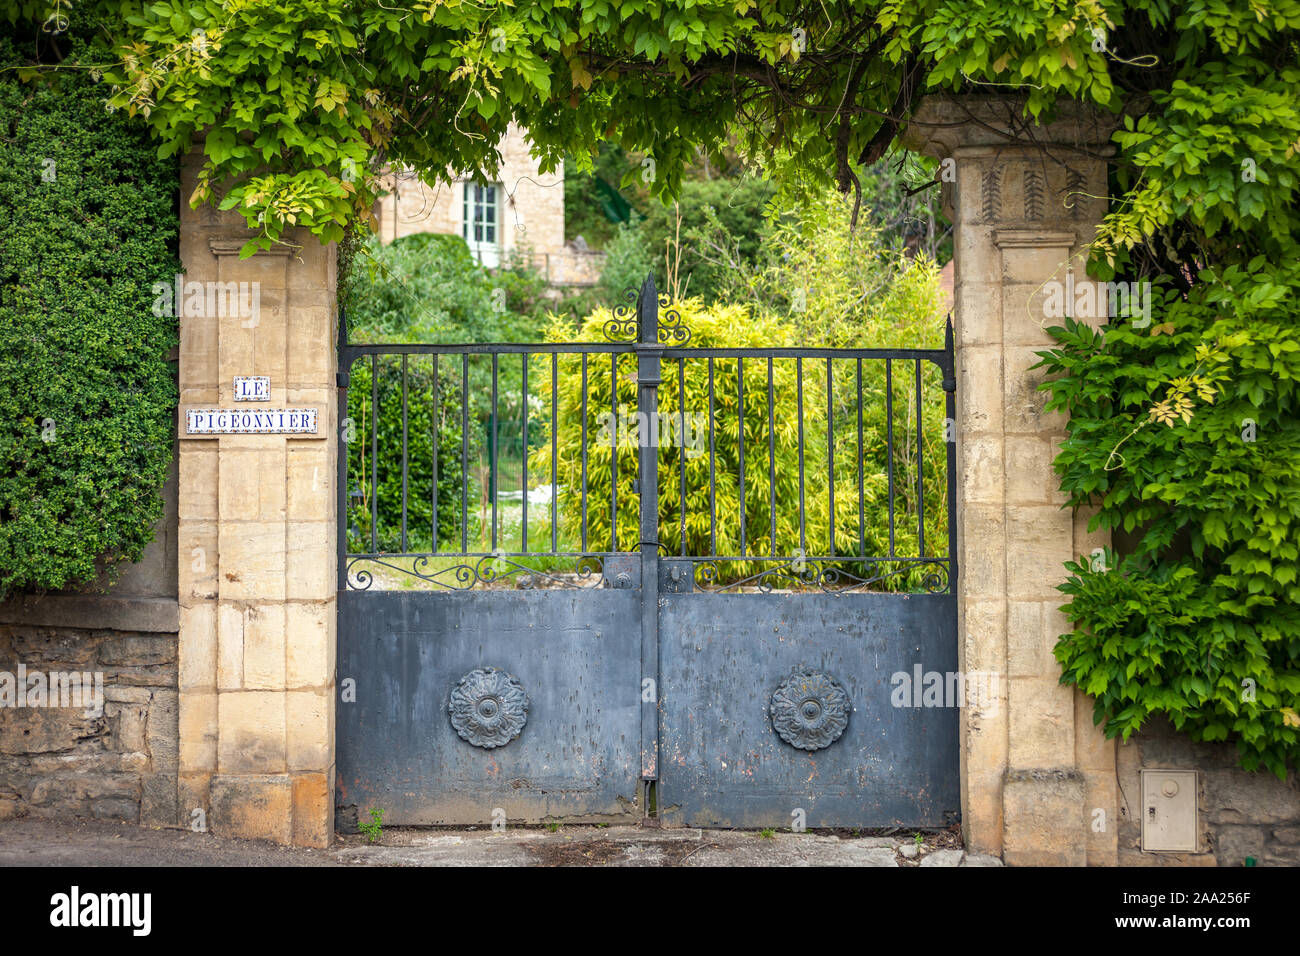 Detail of old metal gate with stone walls Stock Photo